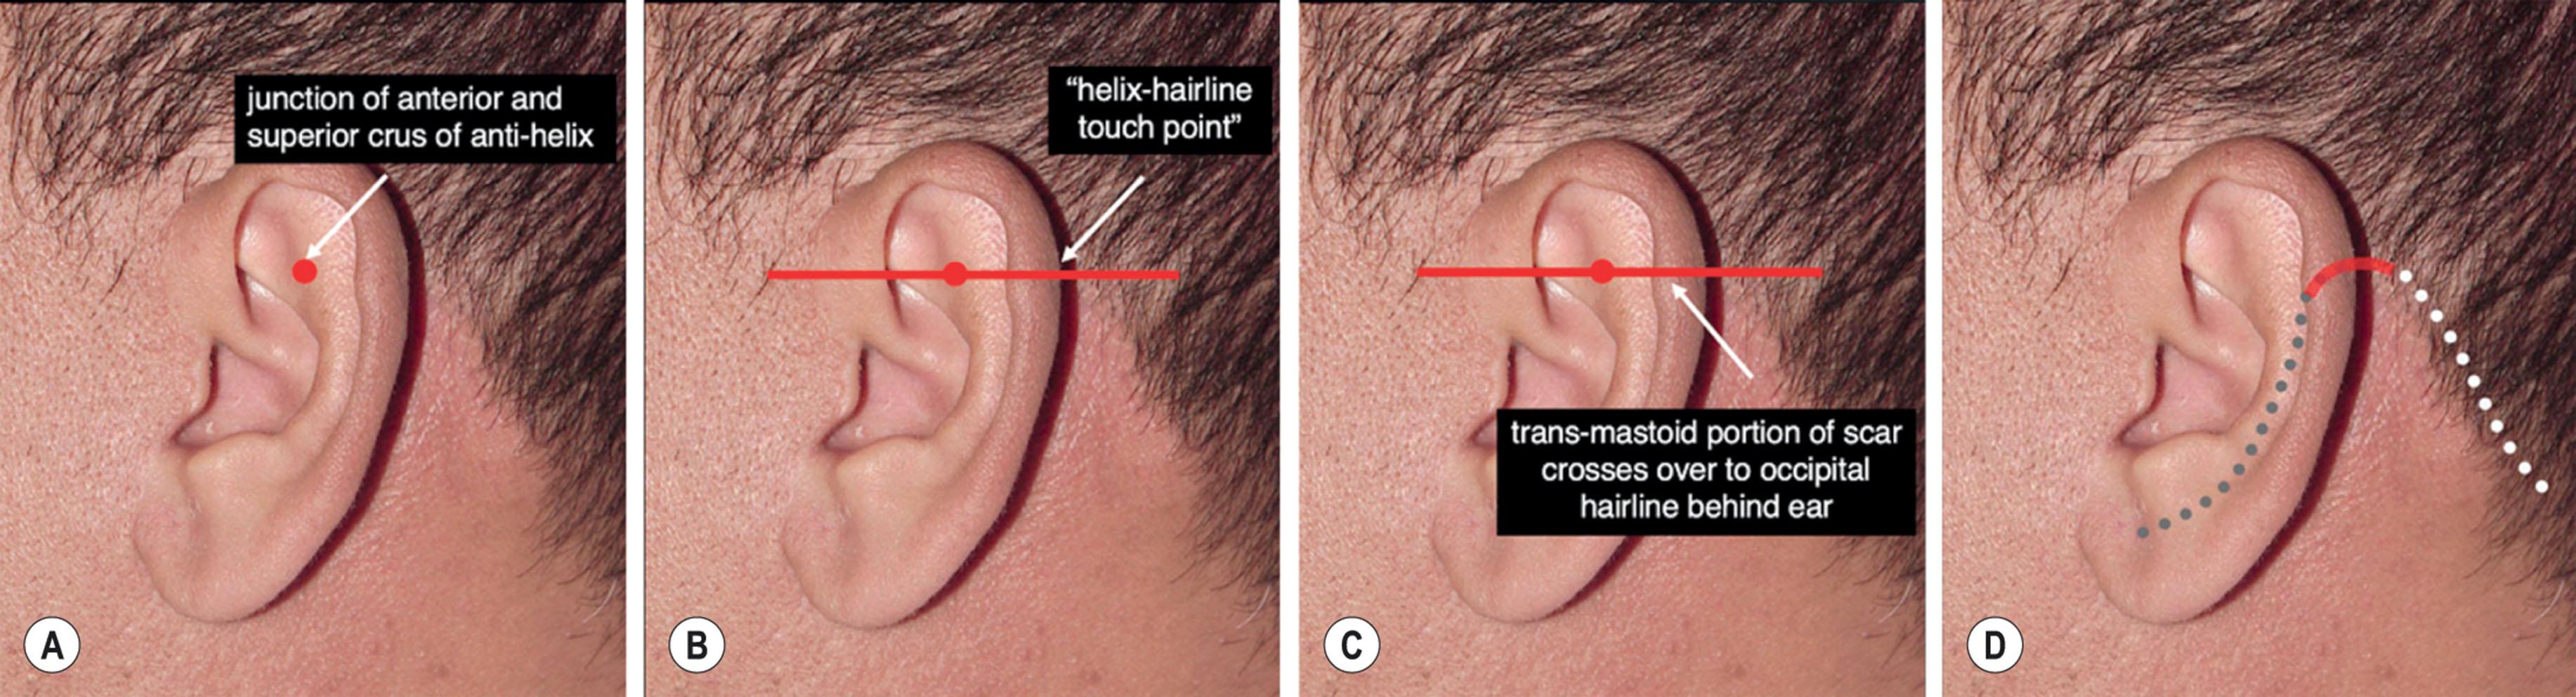 Figure 9.8.20, Planning the position of the transmastoid part of the postauricular incision. Strategically placing the transmastoid part of the postauricular incision conceals it and allows optimal excision of skin from the anterior neck. If it is placed too low it is visible when the patient’s hair is worn up or if they wear a short hairstyle. If it is placed too high the defect created will force and overly vertical shift of the postauricular skin flap and compromise improvement in the neck (see also Fig. 9.8.19 ). (A) The point of divergence of the anterior and superior crus of the helix provides a useful guide as to how high the transmastoid part of the postauricular incision should be placed (red dot). (B) At this horizontal level (red line) the rim of the helix will typically “touch” the occipital hairline in the lateral view. (C) A transmastoid scar placed at this level will cross over to the occipital scalp in a hidden location. Note that if the incision were placed lower the resulting scar would show. (D) Typical plan for the postauricular incision showing the transmastoid component (red line) to be concealed (gray dotted line shows location of the conchomastoid component incision hidden behind the ear and white dotted line the occipital incision hidden along the occipital hairline). (Note: the patient shown in Fig. 9.8.20A–D has undergone a previous facelift and it can be seen that his scars are well concealed despite his very short “military style” haircut.)